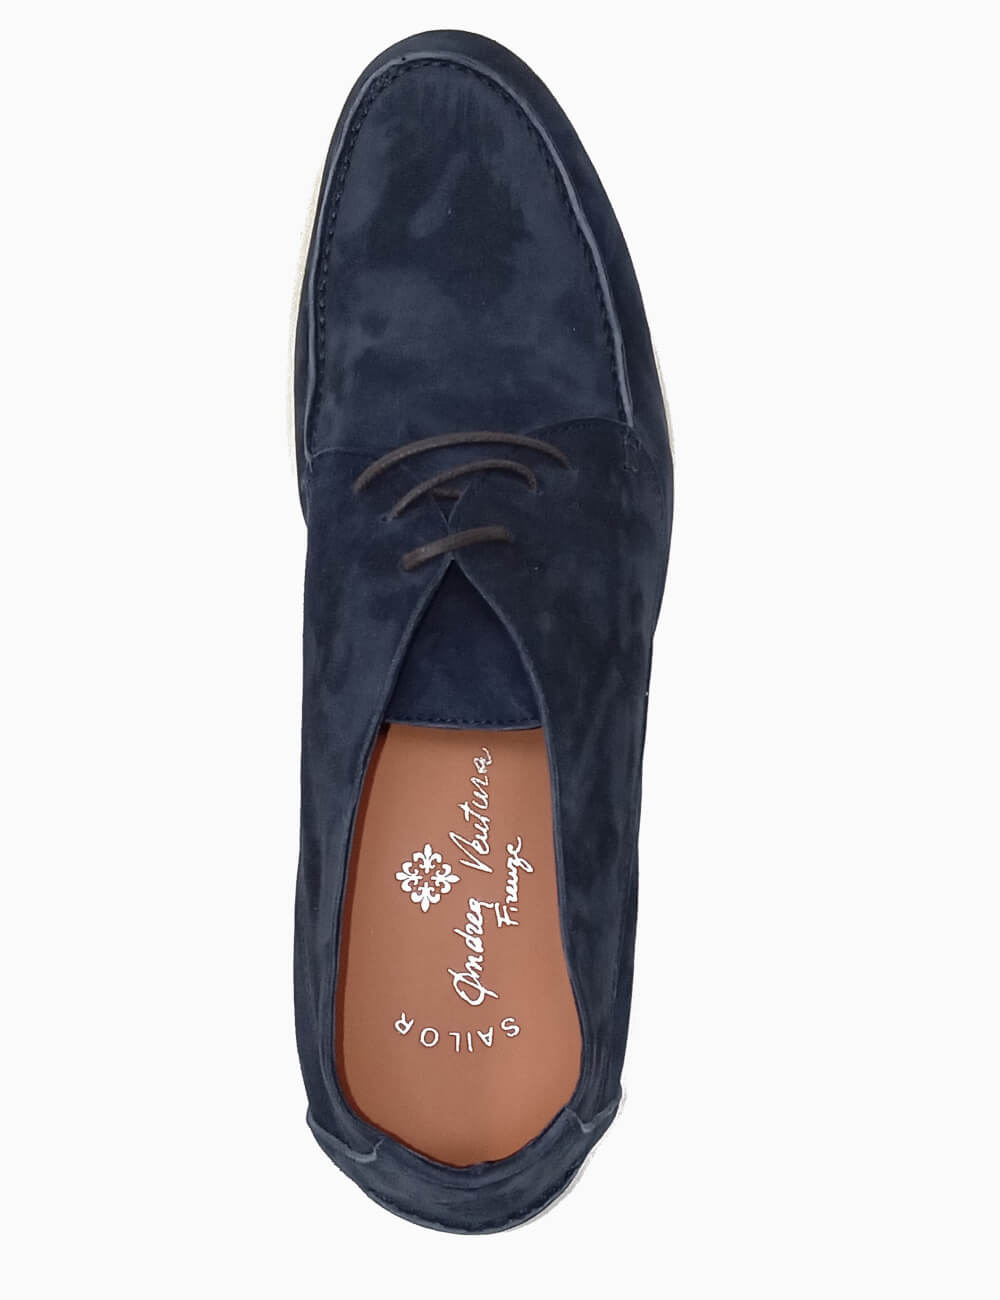 Sailor CRUISE eclipse blue suede summer laced loafer - Andrea Ventura  Firenze